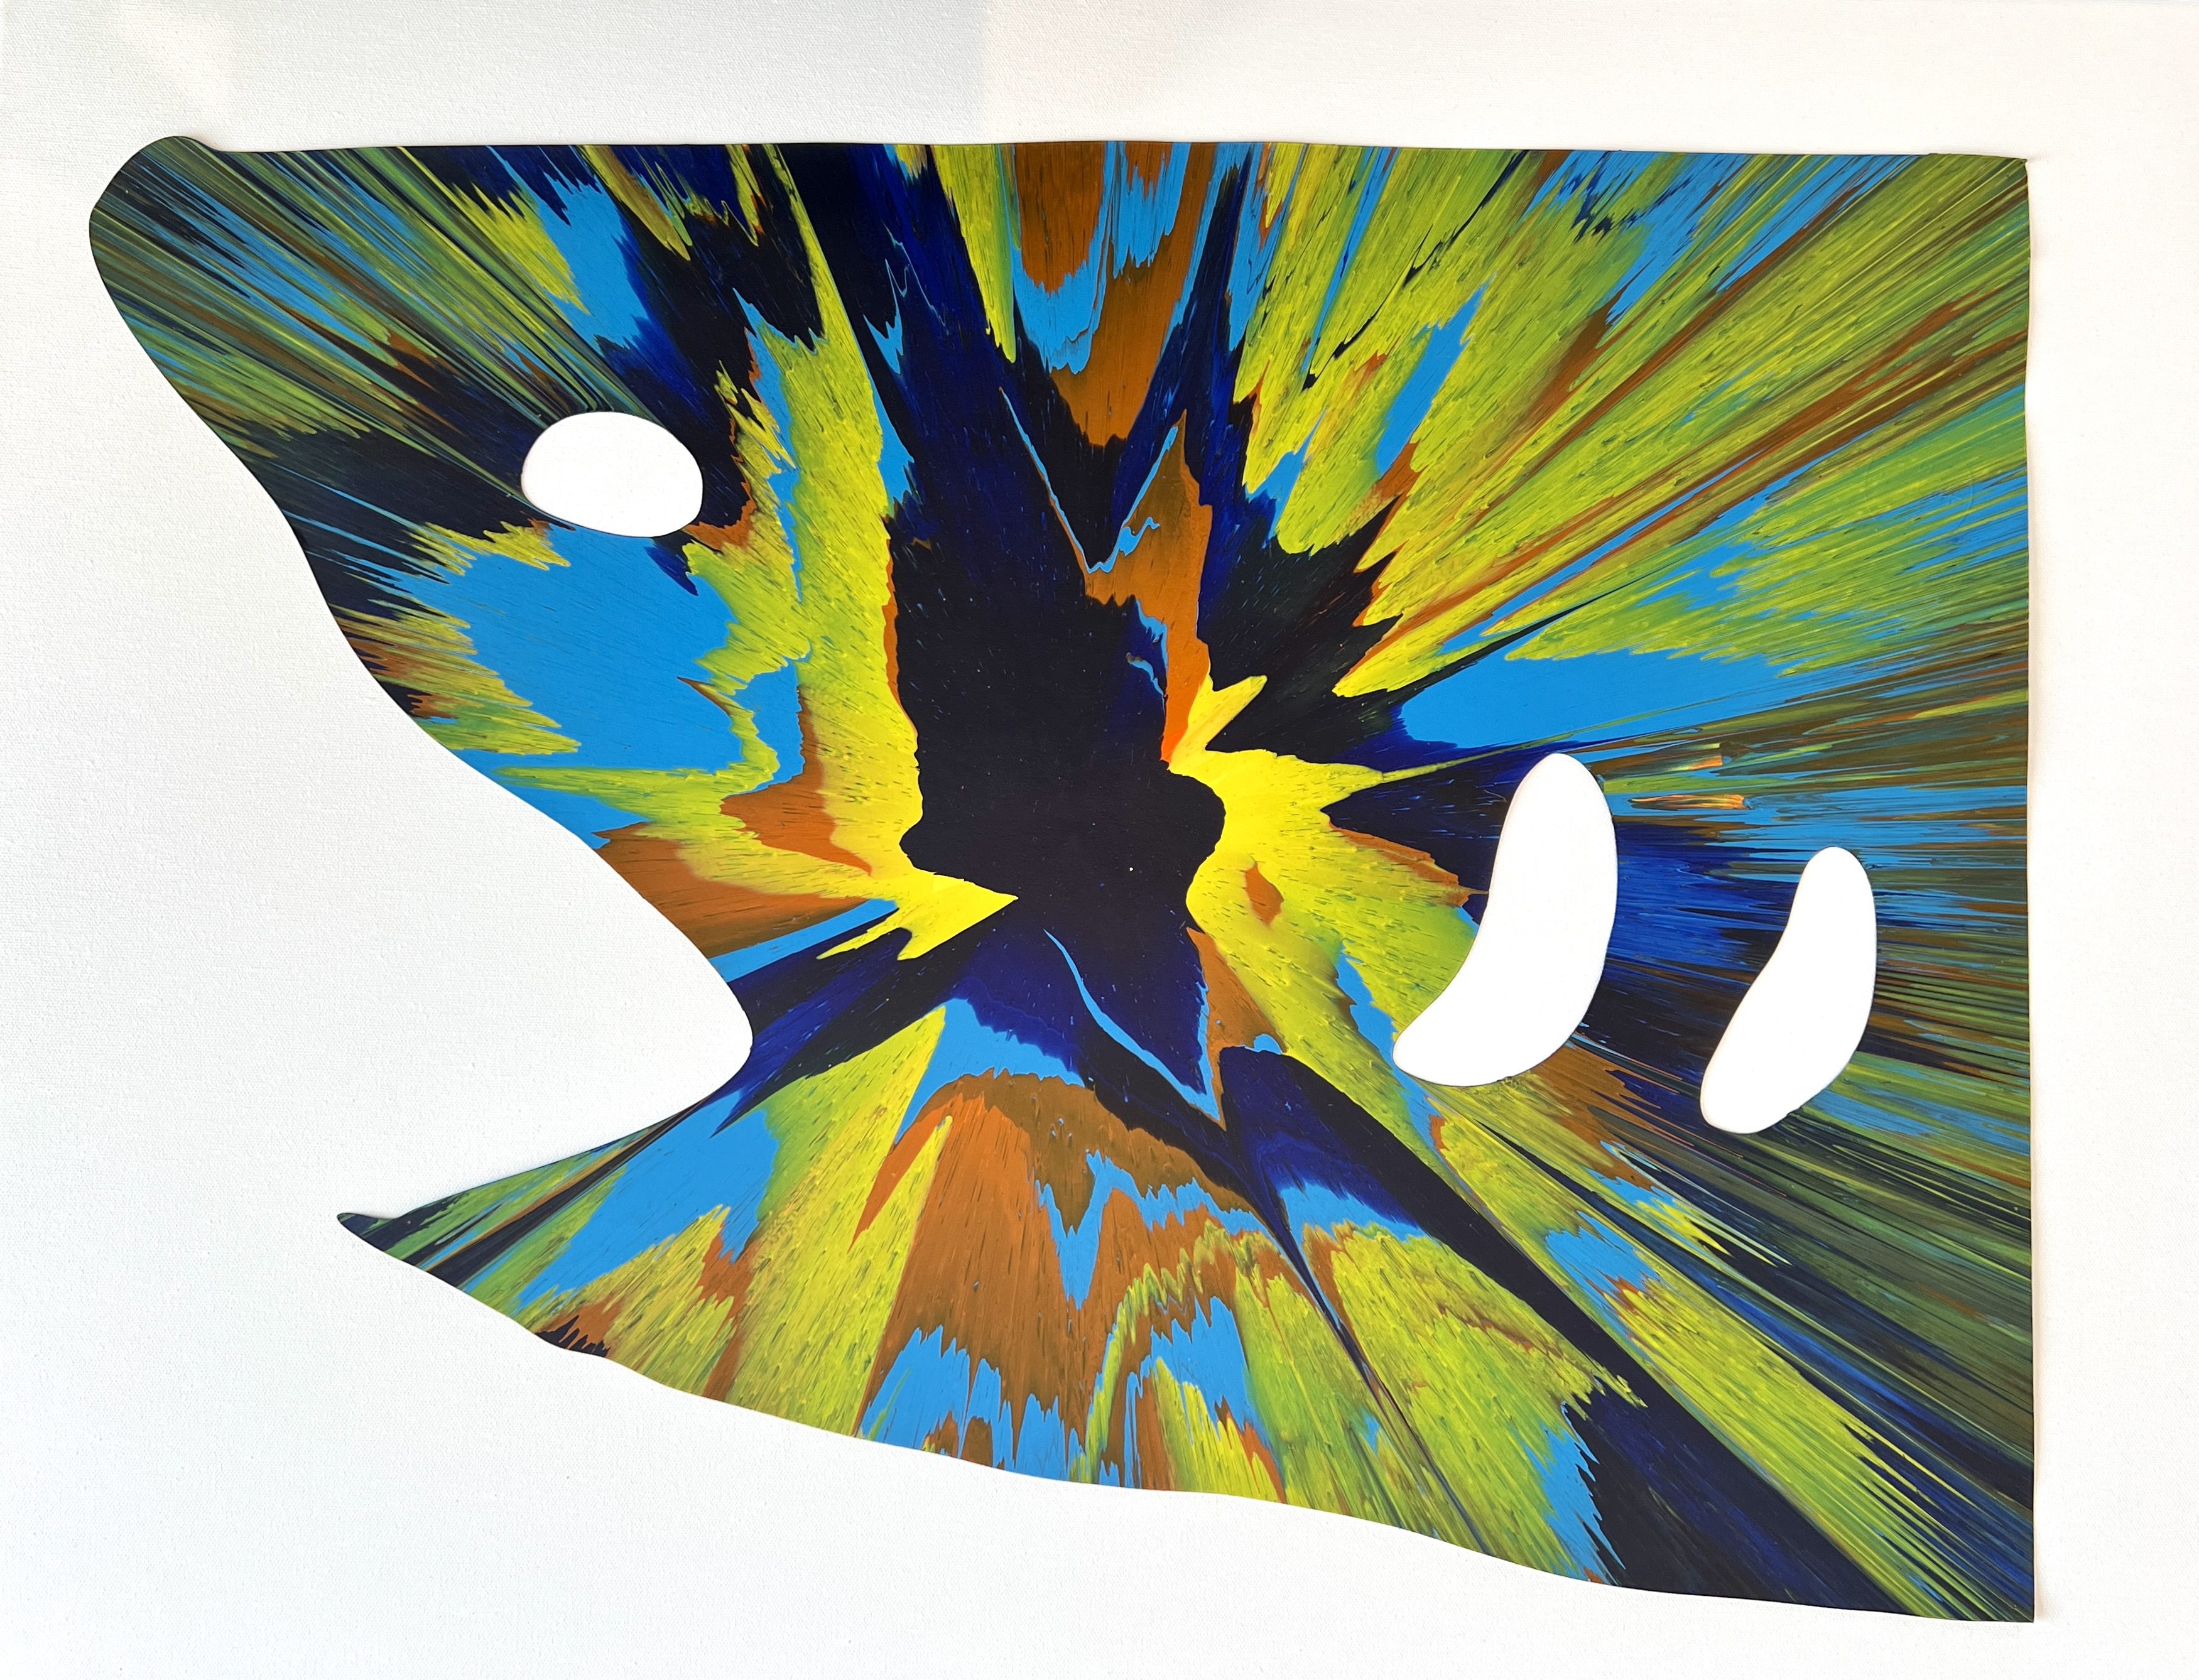 Damien Hirst. 2009. Shark. Spin Painting, acrylic on paper. Signature stamp